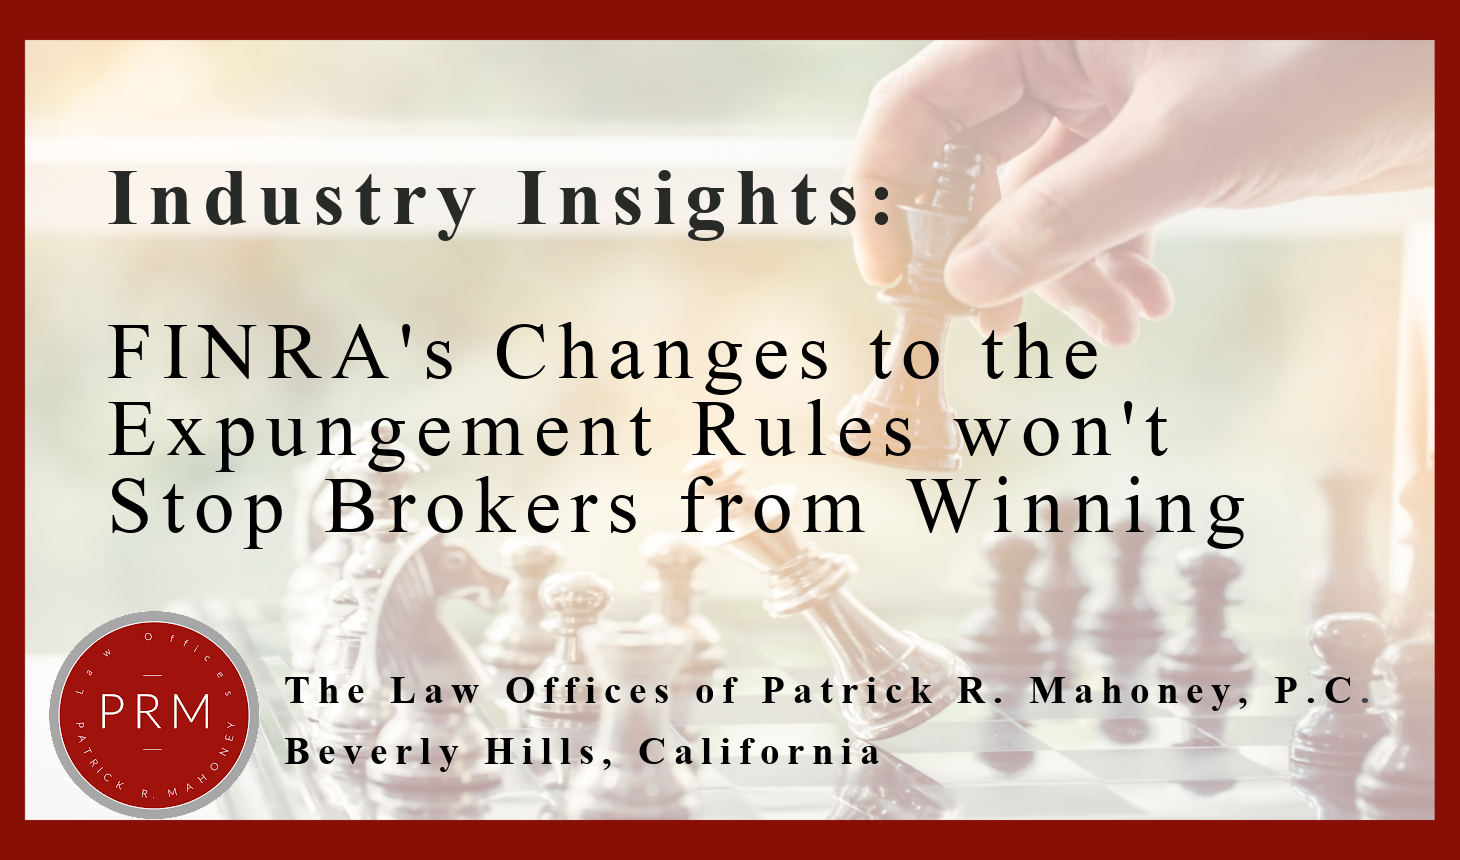 FINRA Expungement: Imminent Rule Changes won’t Stop Brokers from Winning